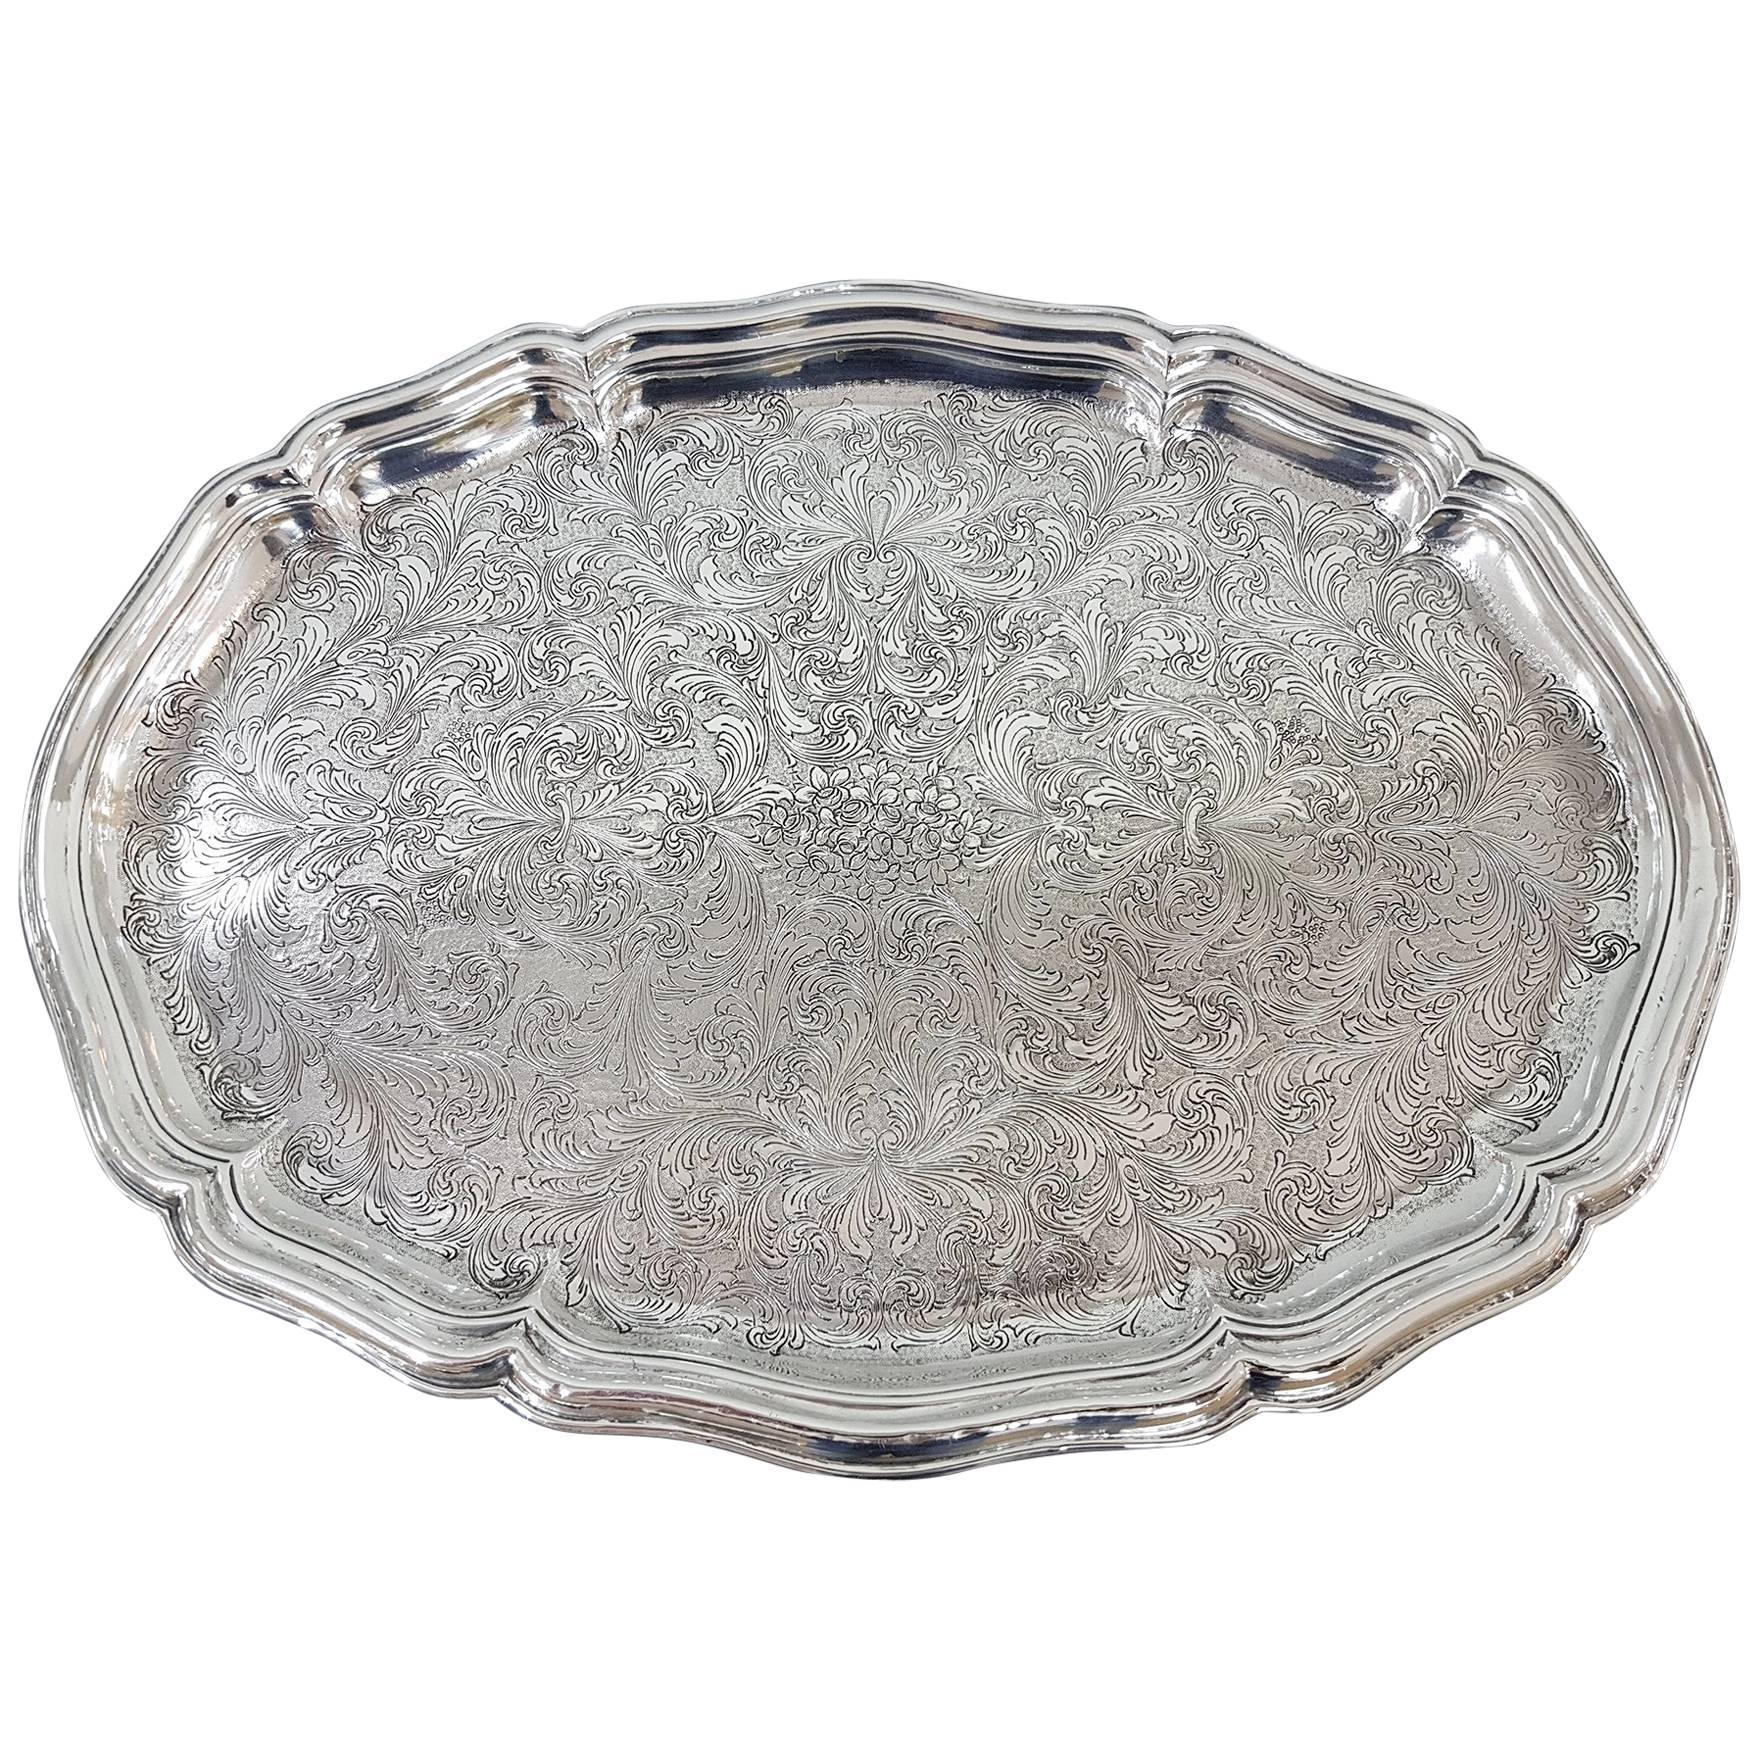 19th Century Italian Silver Oval Baroque Tray, Completely Engraved by Hand